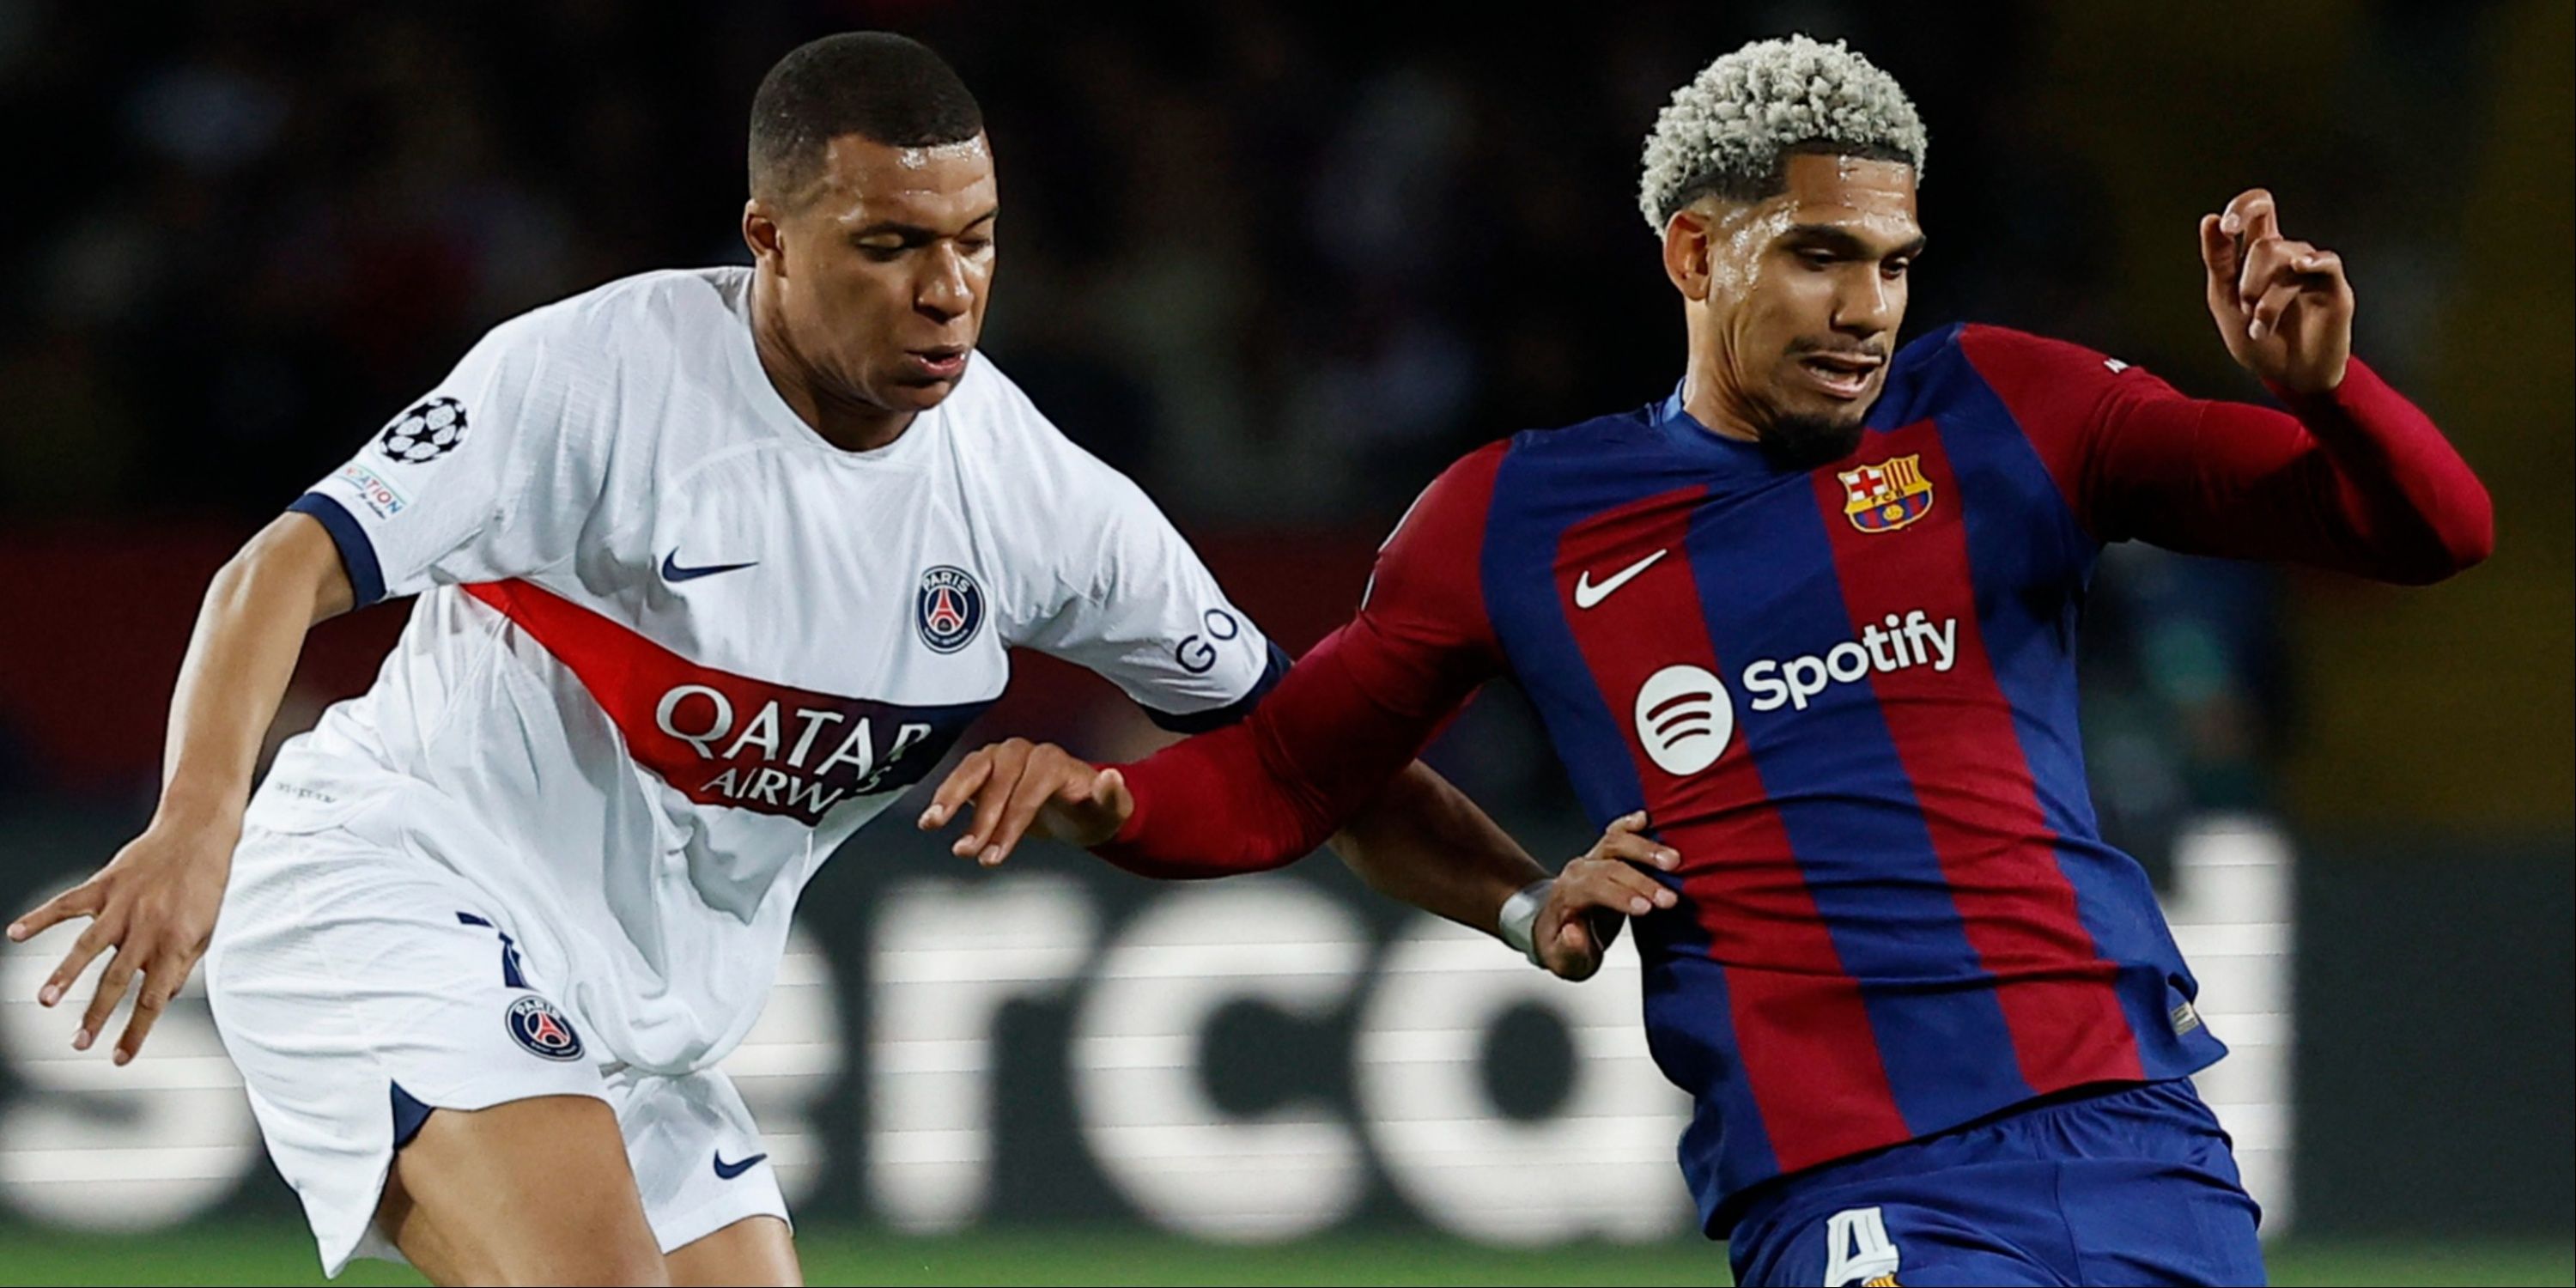 Ronald Araujo and Kylian Mbappe in action in the Champions League